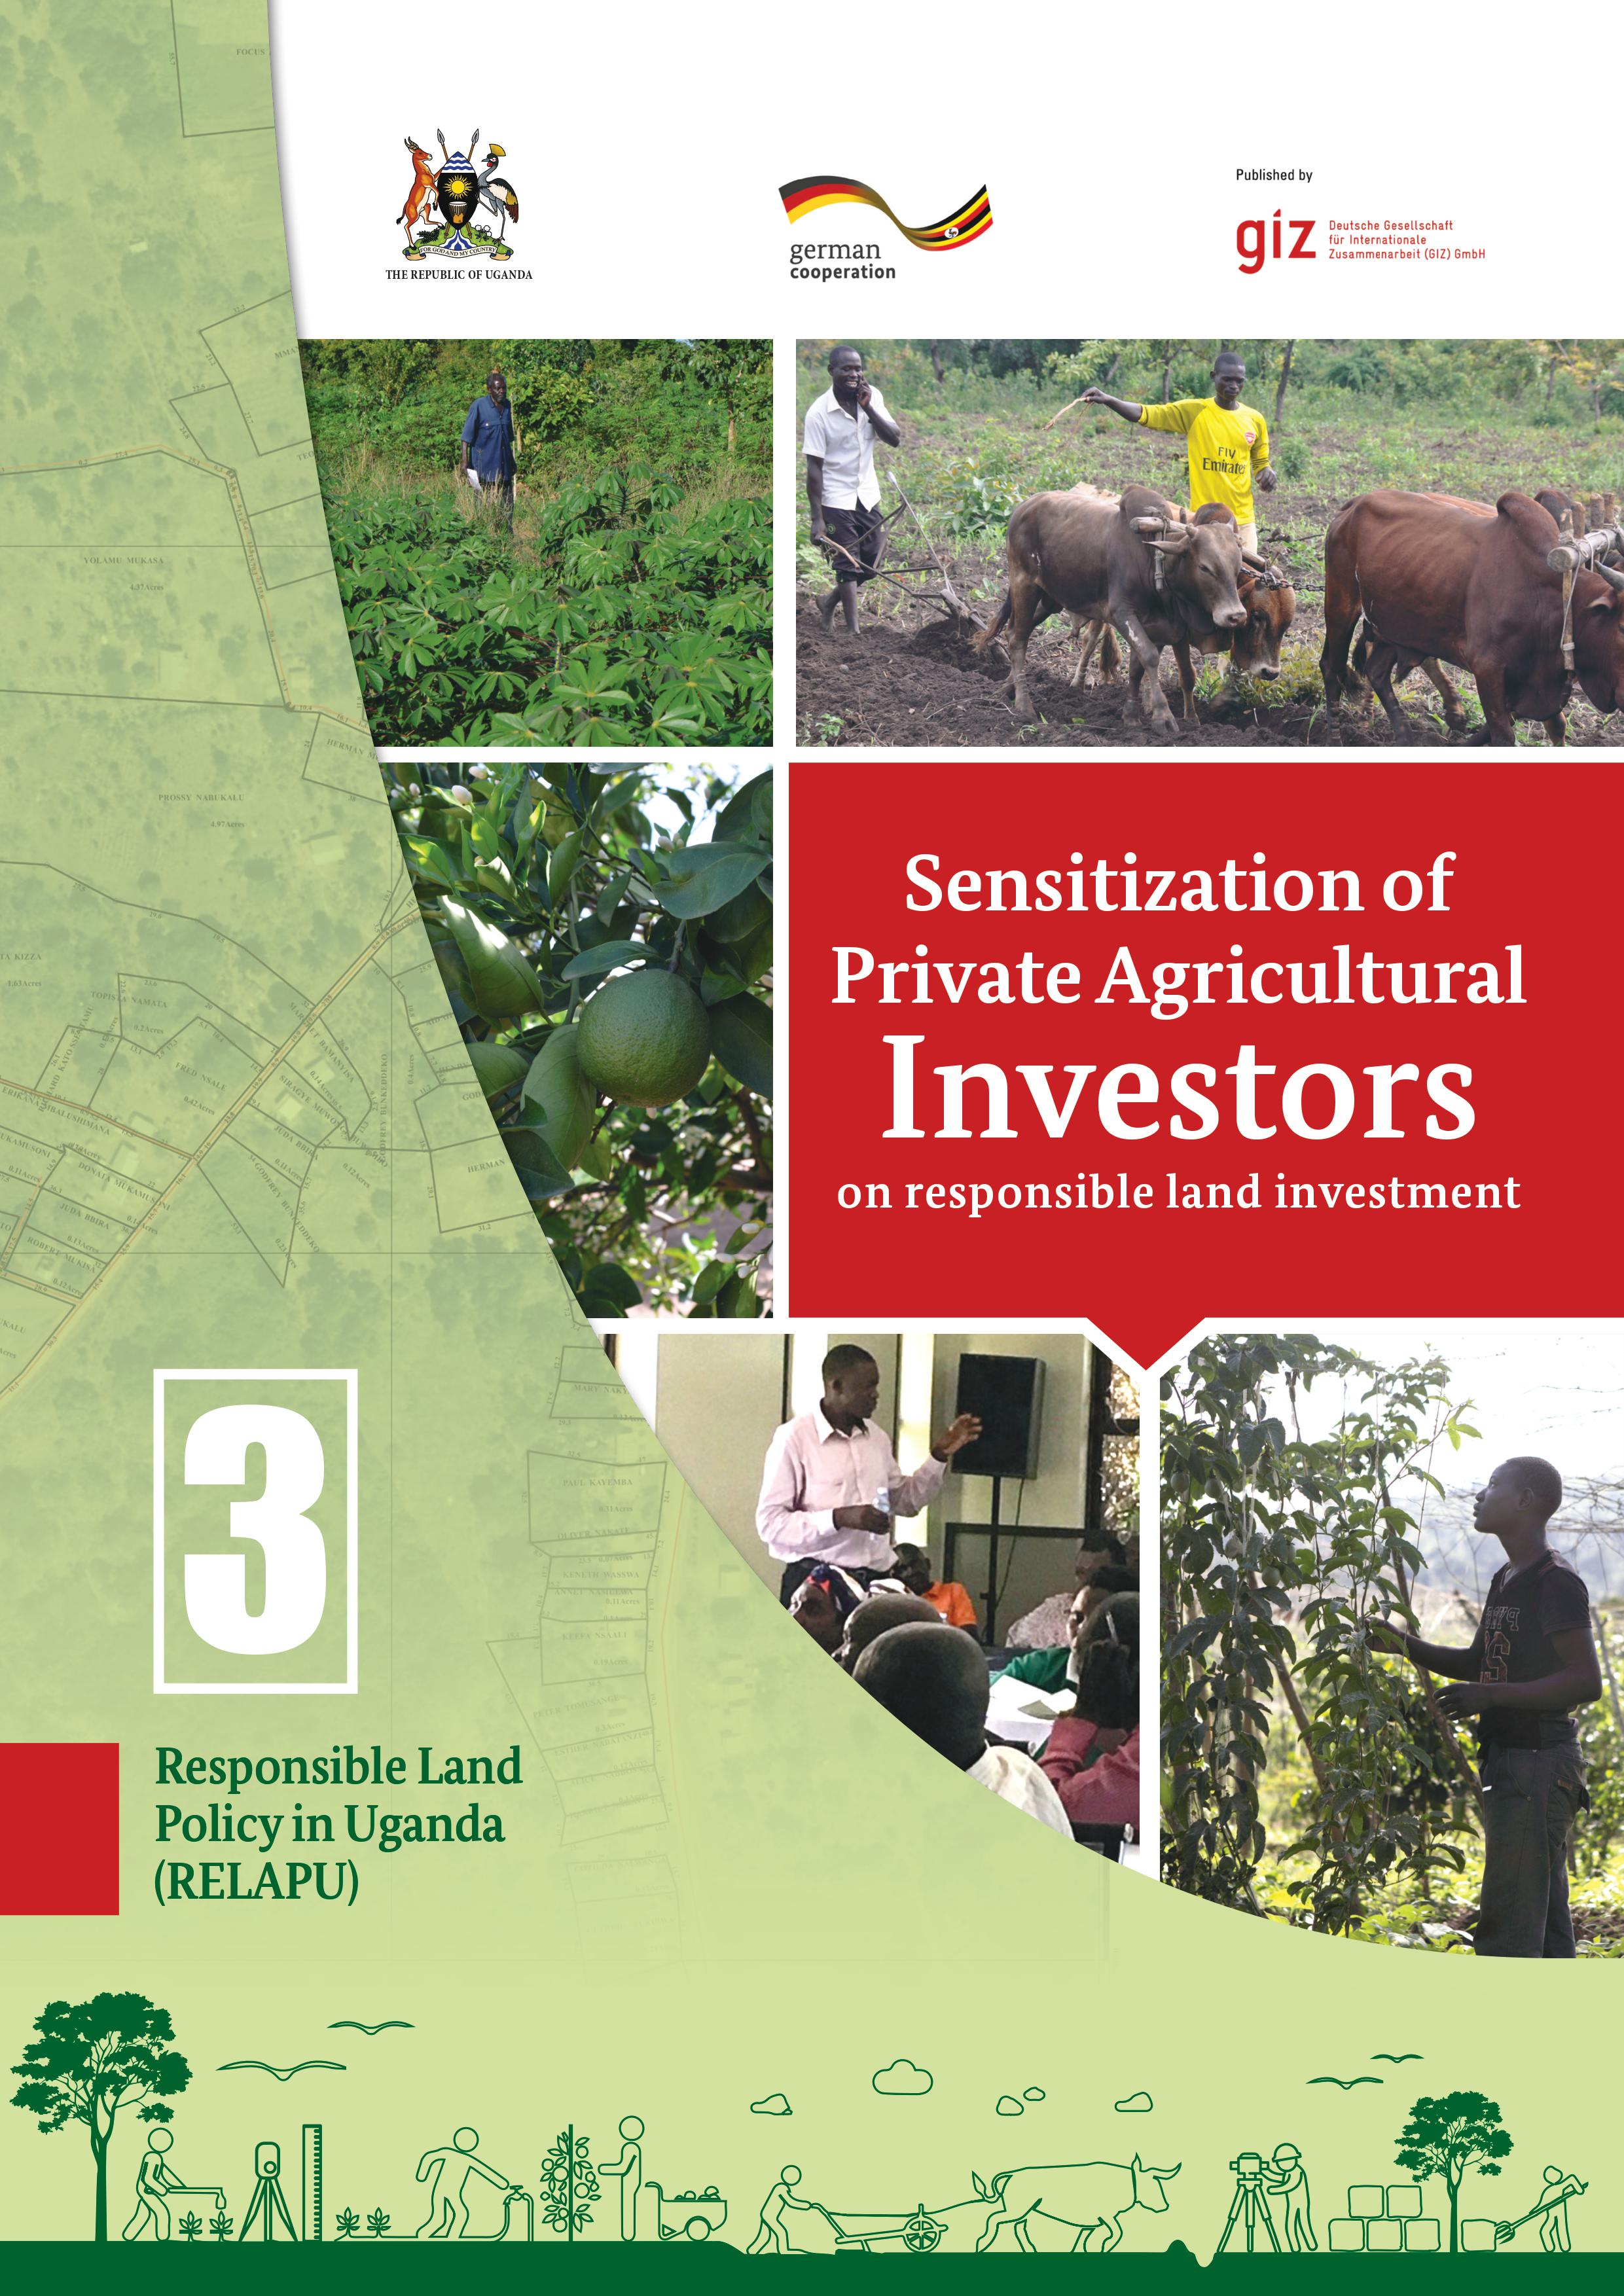 Sensitization of private agricultural investors on responsible land investment in Uganda